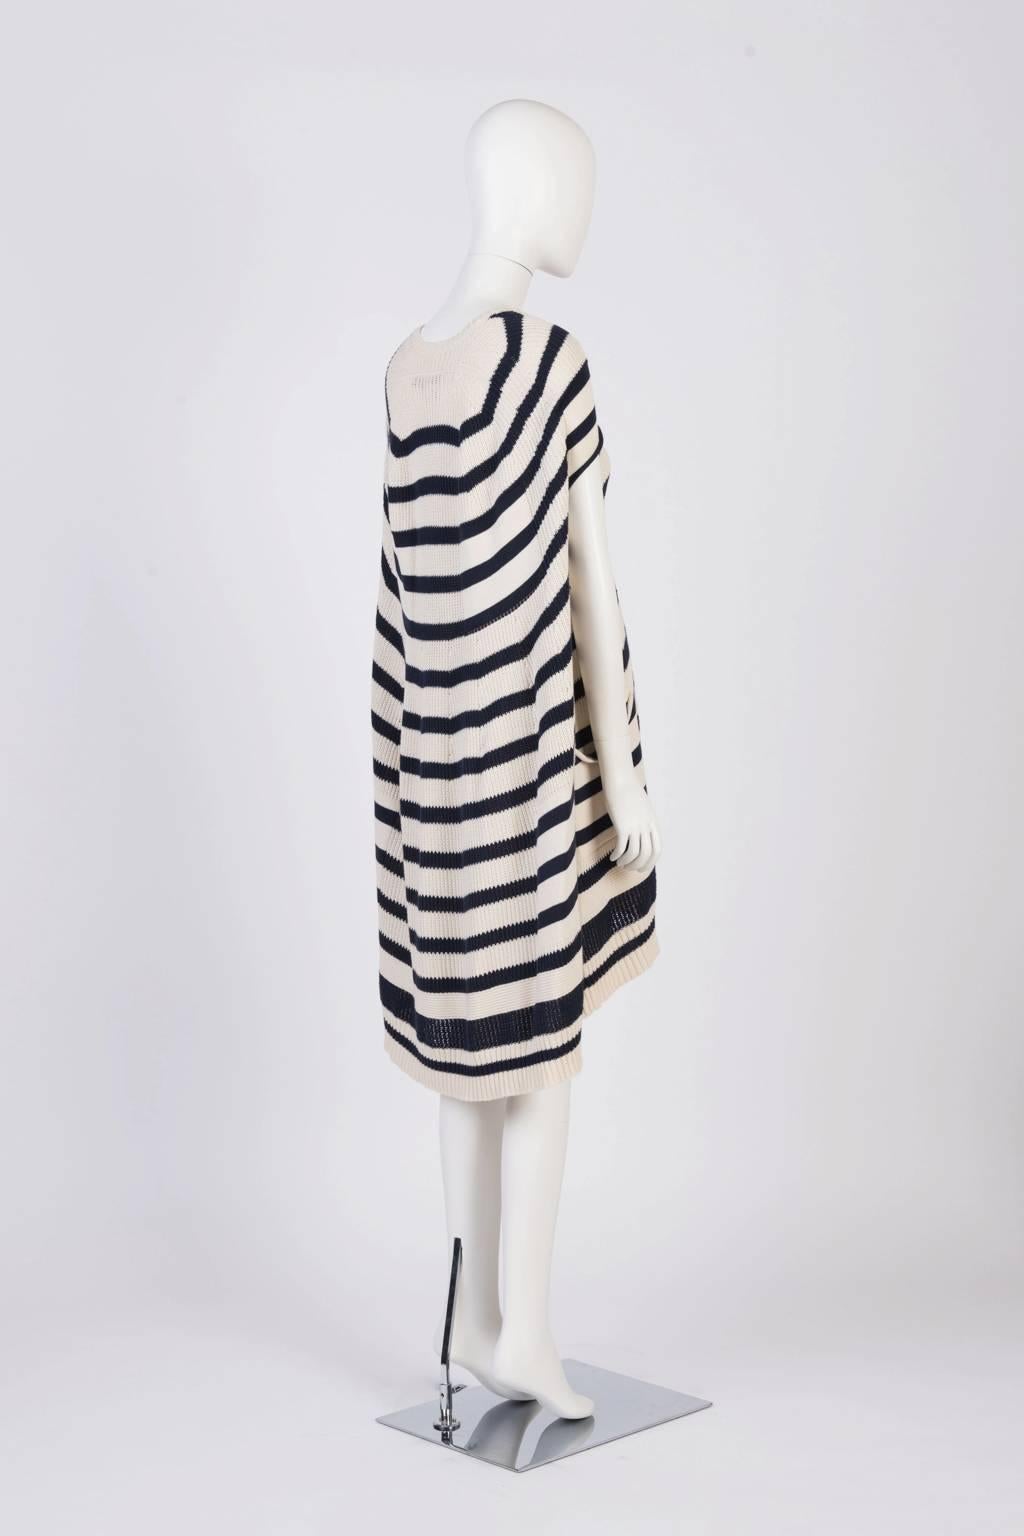 Junya Watanabe Striped A Line Dress  In Excellent Condition For Sale In Xiamen, Fujian